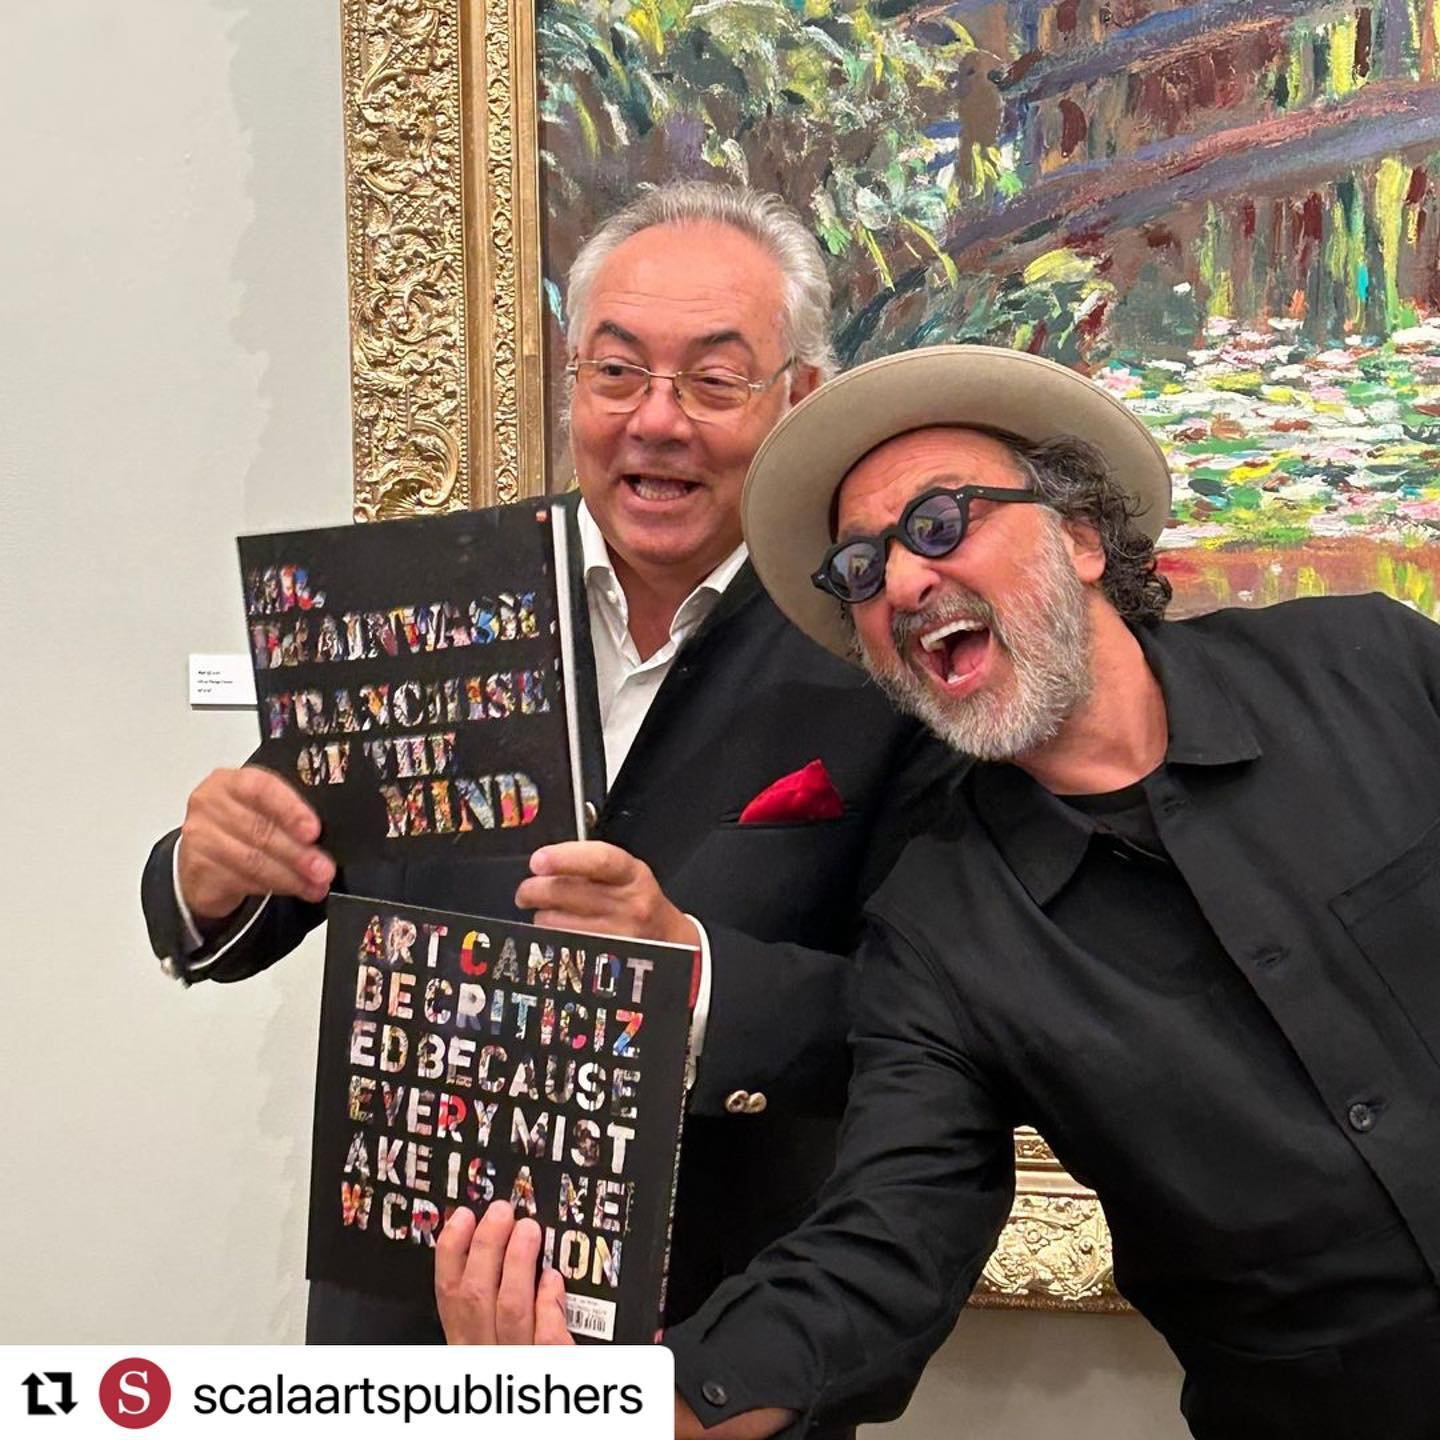 #Repost @scalaartspublishers 
・・・
A wonderful evening celebrating MrBrainwash with @dtrmodern for his solo exhibition and book &lsquo;Franchise of the Mind&rsquo; at @nationalartsclub last week. 

&lsquo;Mr Brainwash: Franchise of the Mind&rsquo; is 